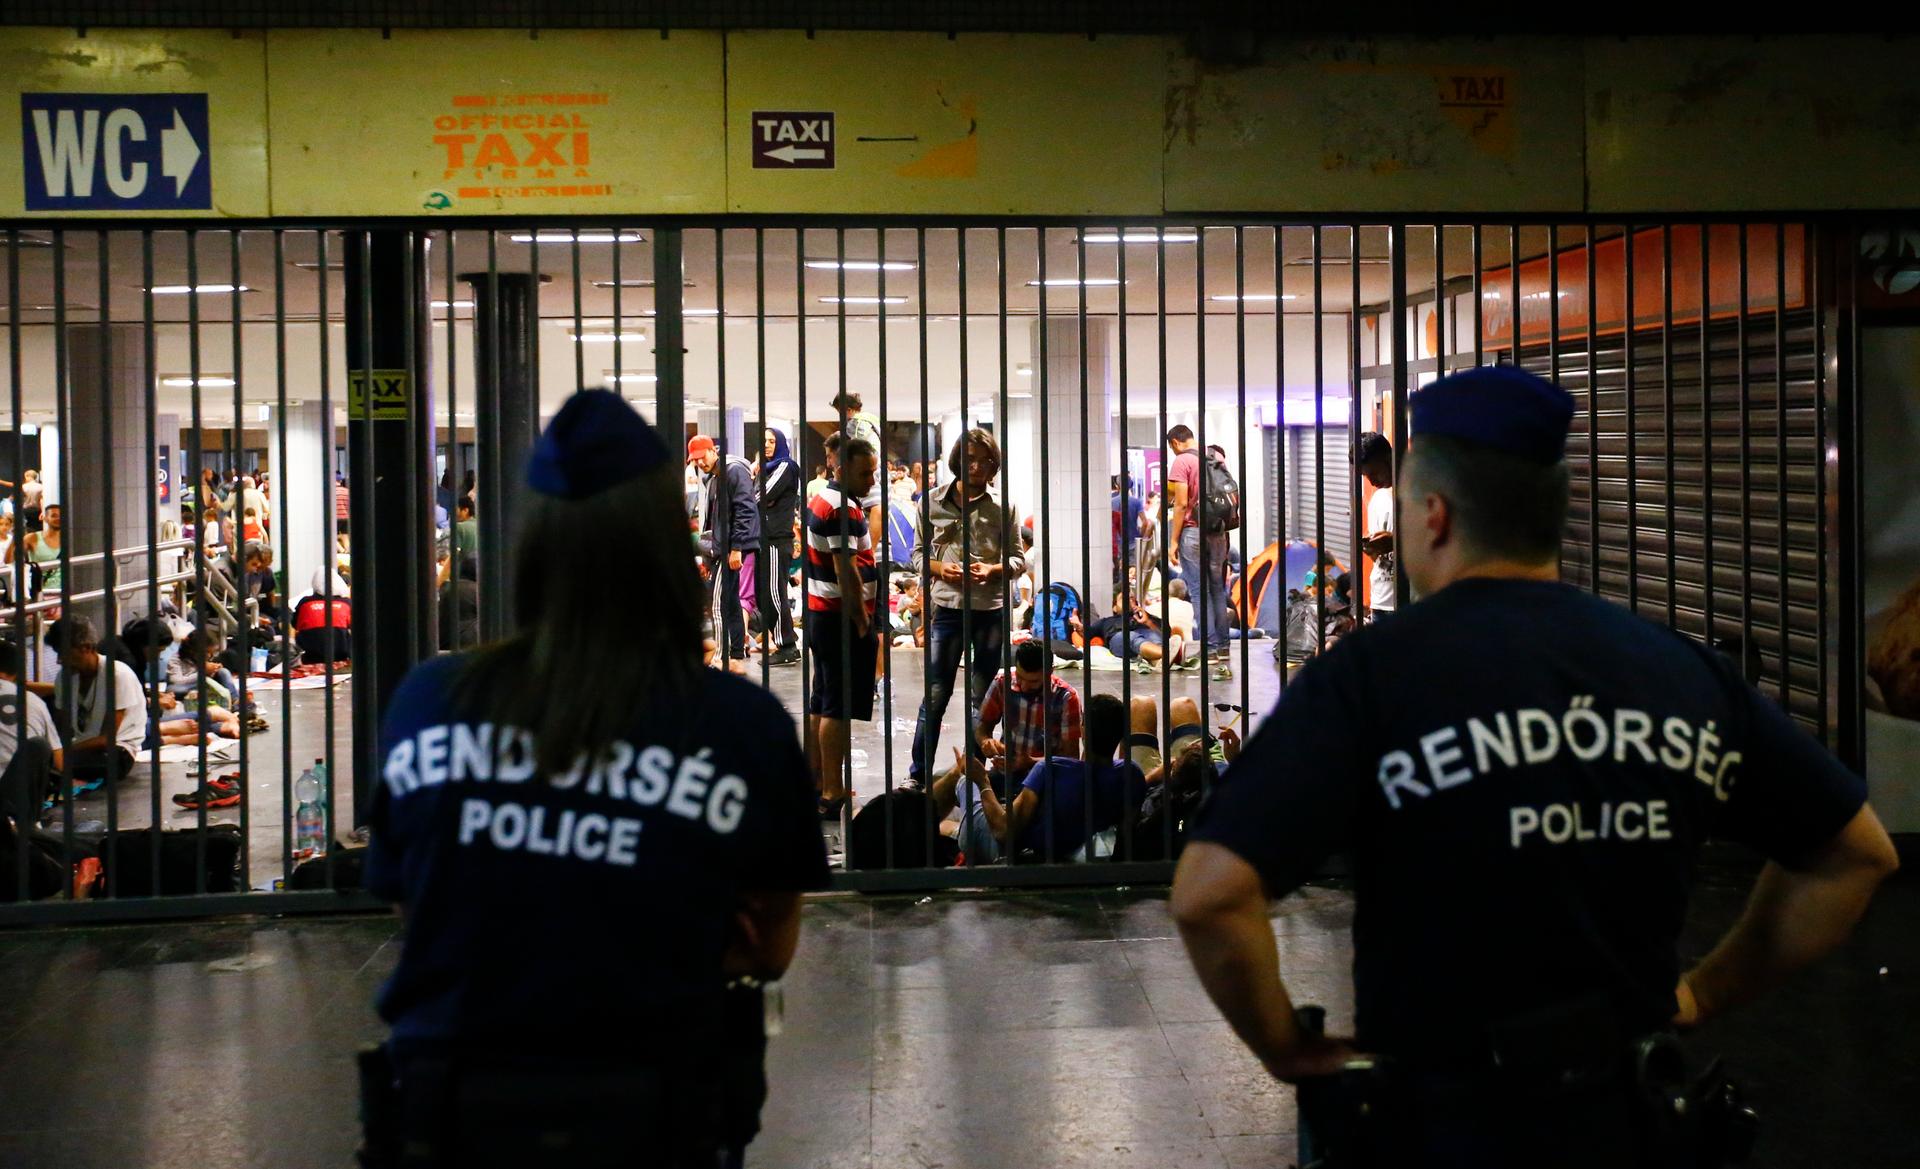 Hungarian police guard refugees at a makeshift camp in an underground station near the Keleti train station in Budapest, Hungary September 2, 2015.